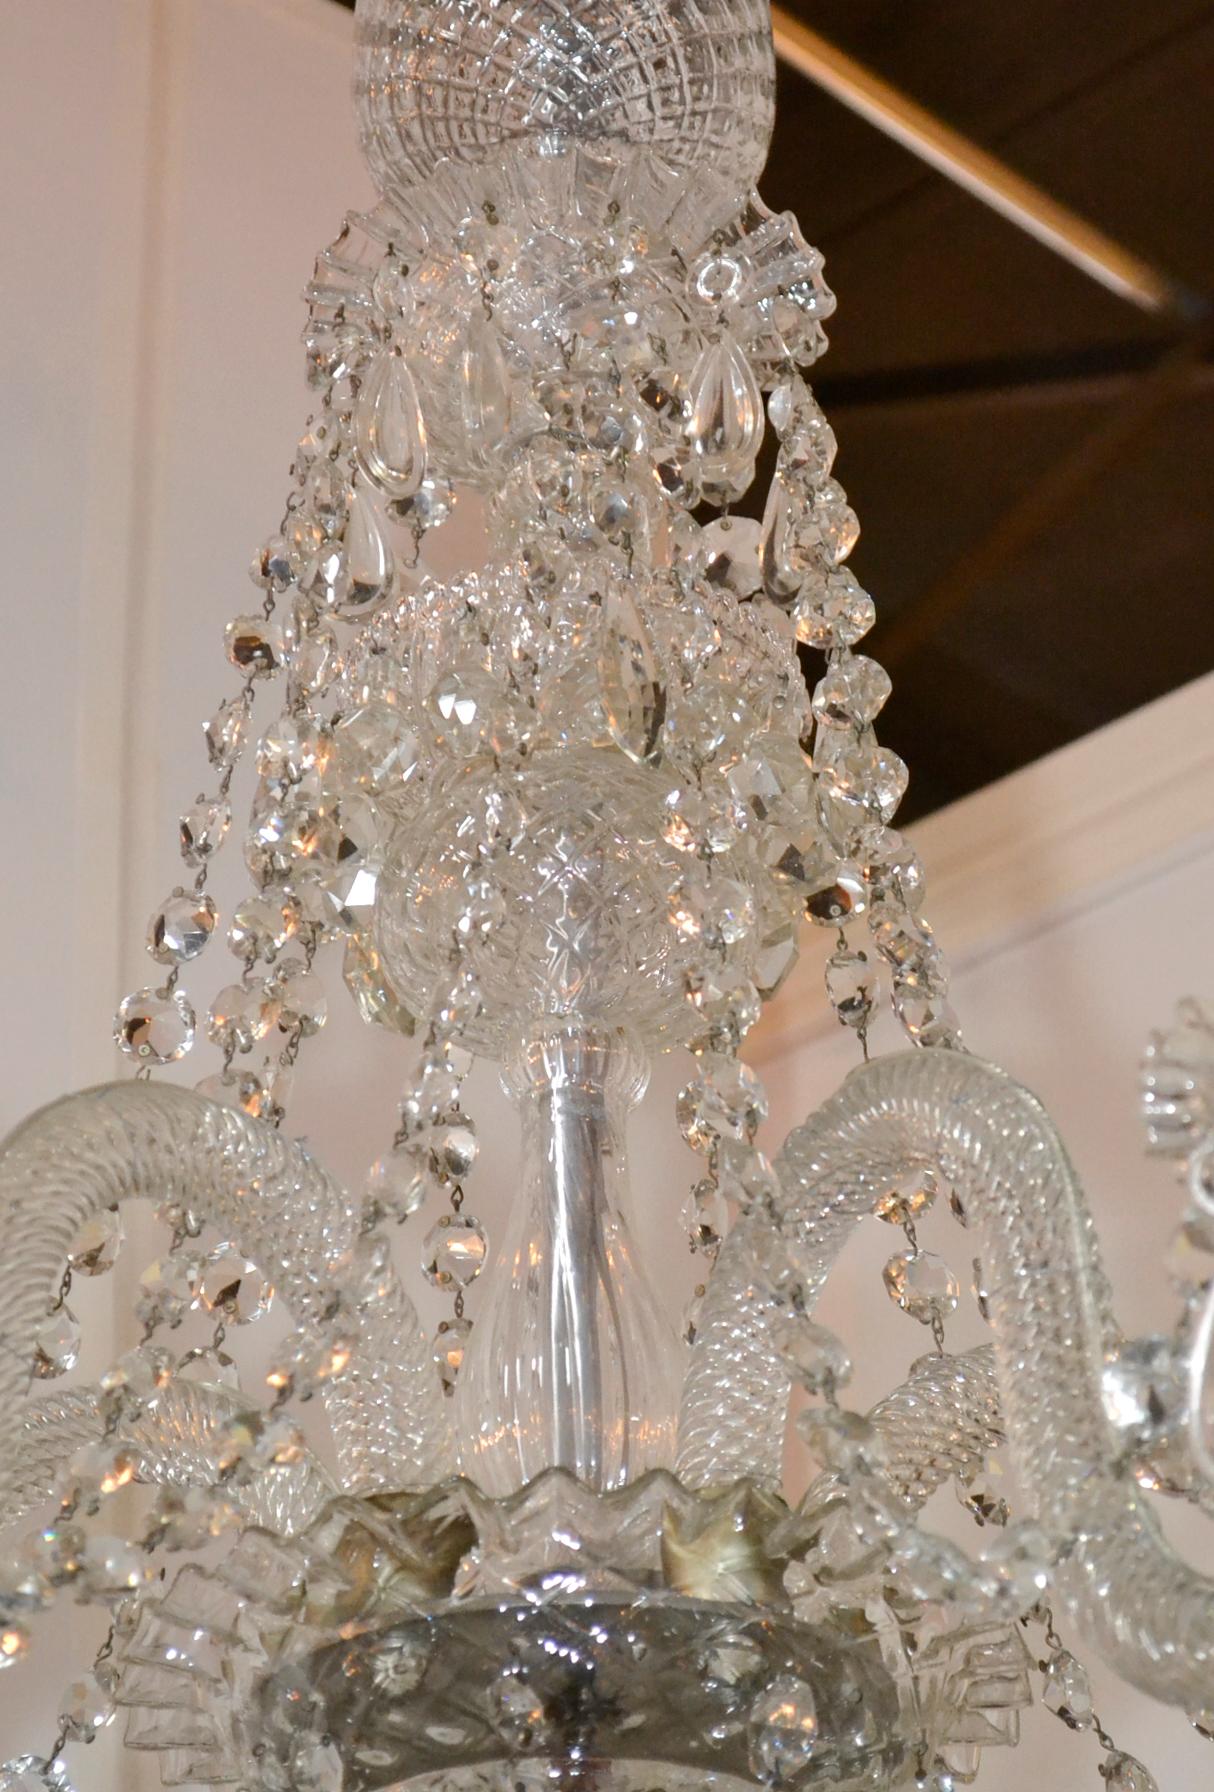 19th Century Baccarat Style Crystal Chandelier For Sale 1